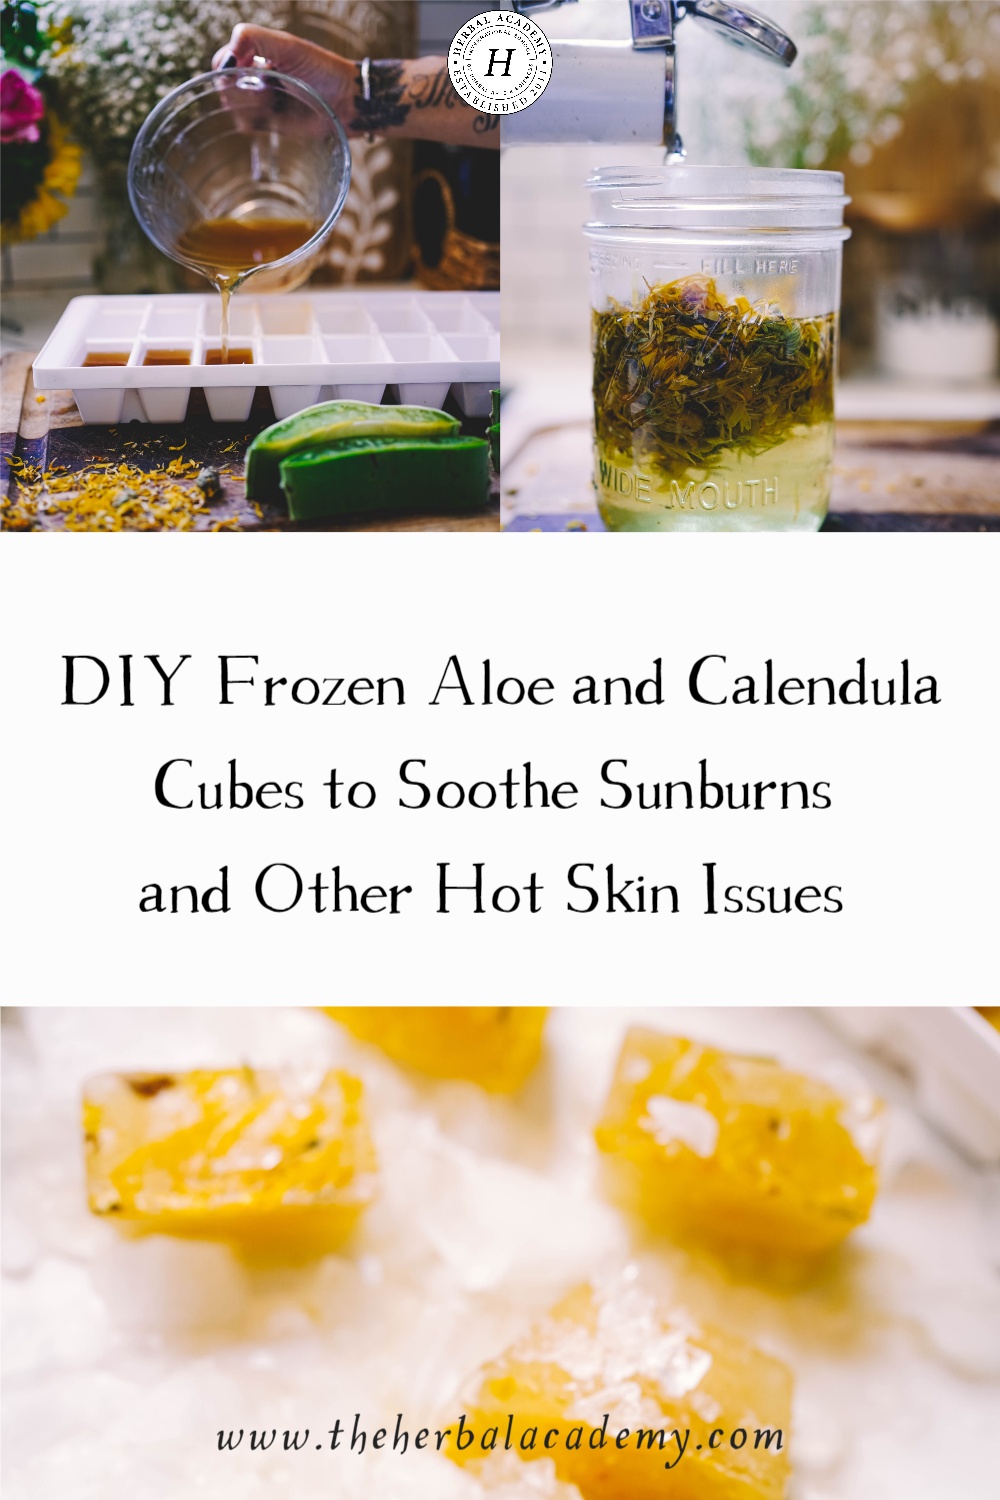 DIY Frozen Aloe and Calendula Cubes to Soothe Sunburns and Other Hot Skin Issues | Herbal Academy | This DIY herbal ice cube recipe provides a cooling effect that instantly brings down the heat to soothe burns and other hot skin issues.